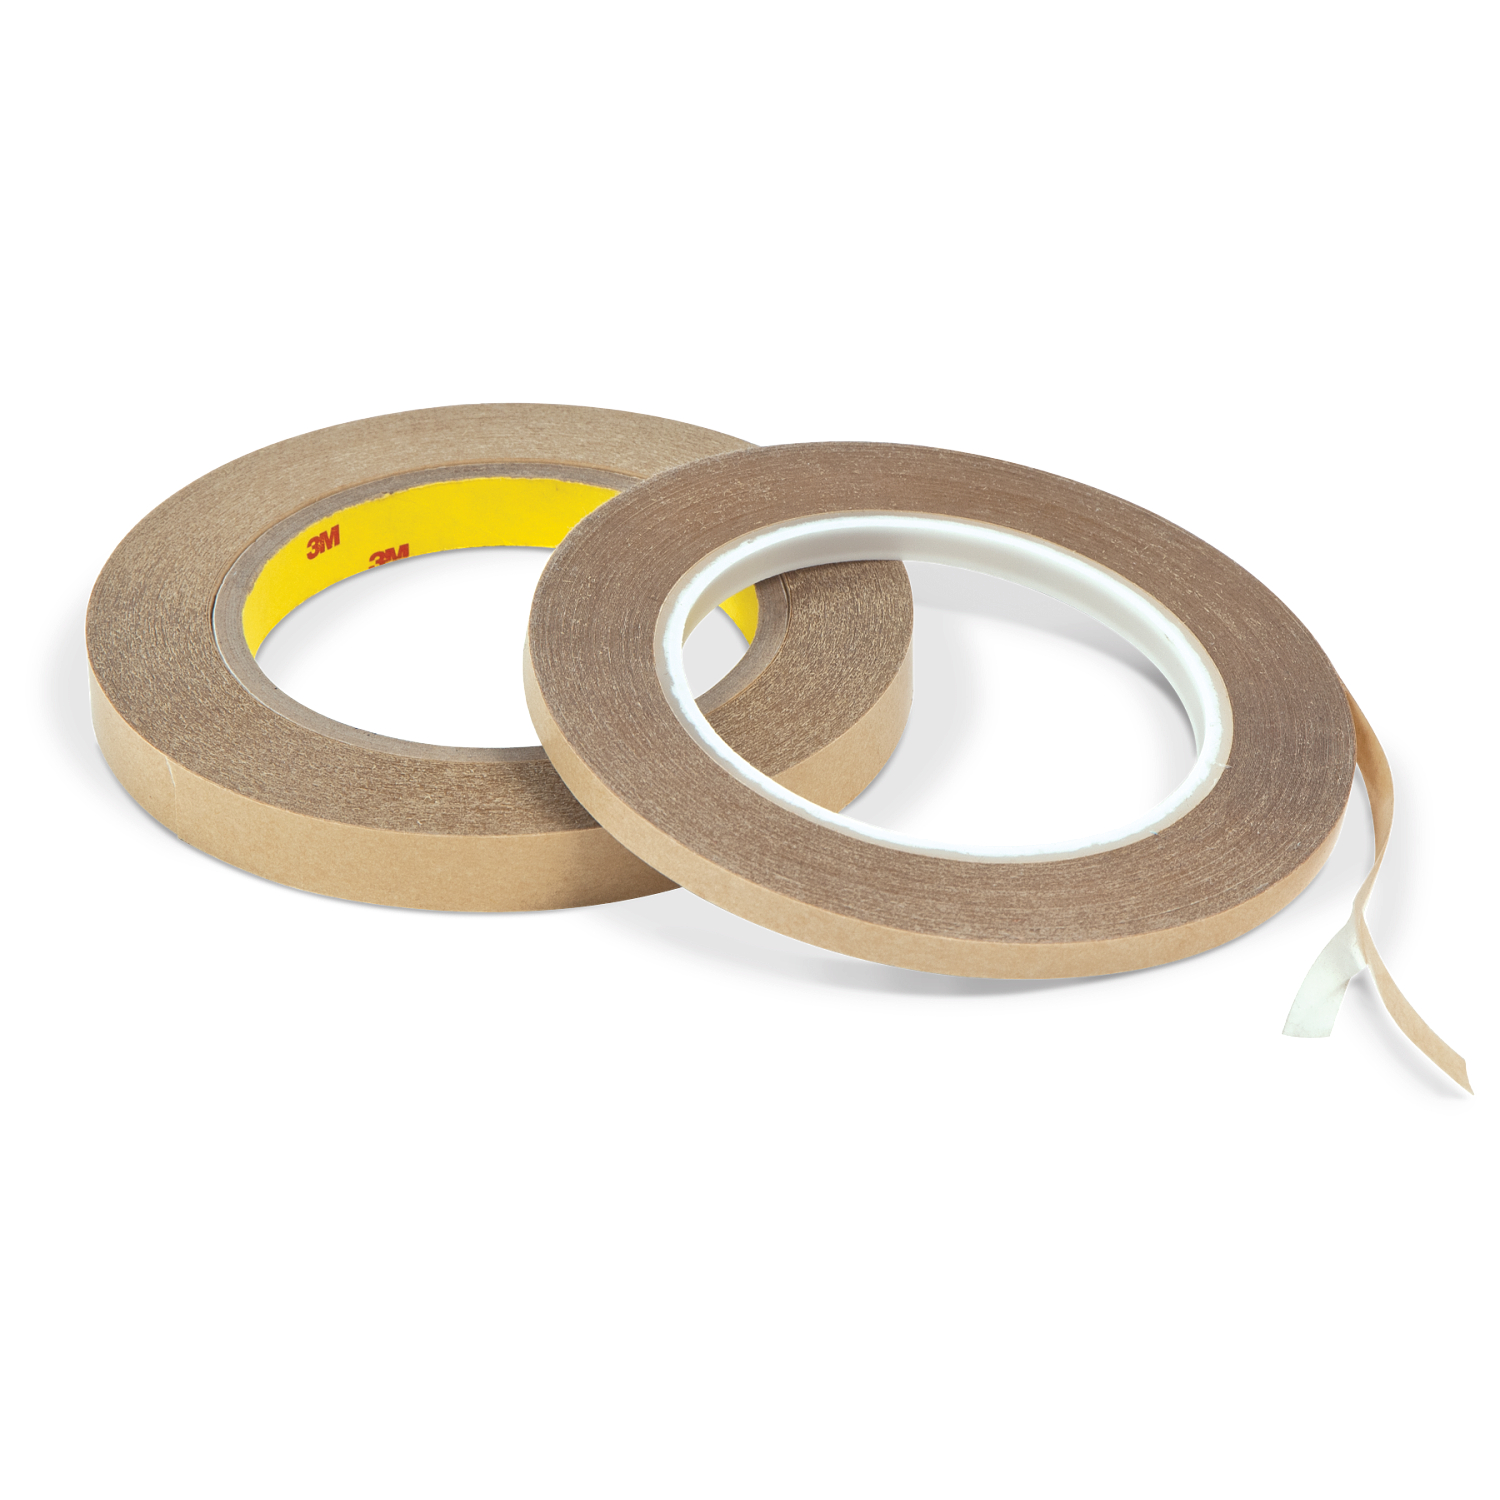 Double Coated Transparent 3M 415 Tape